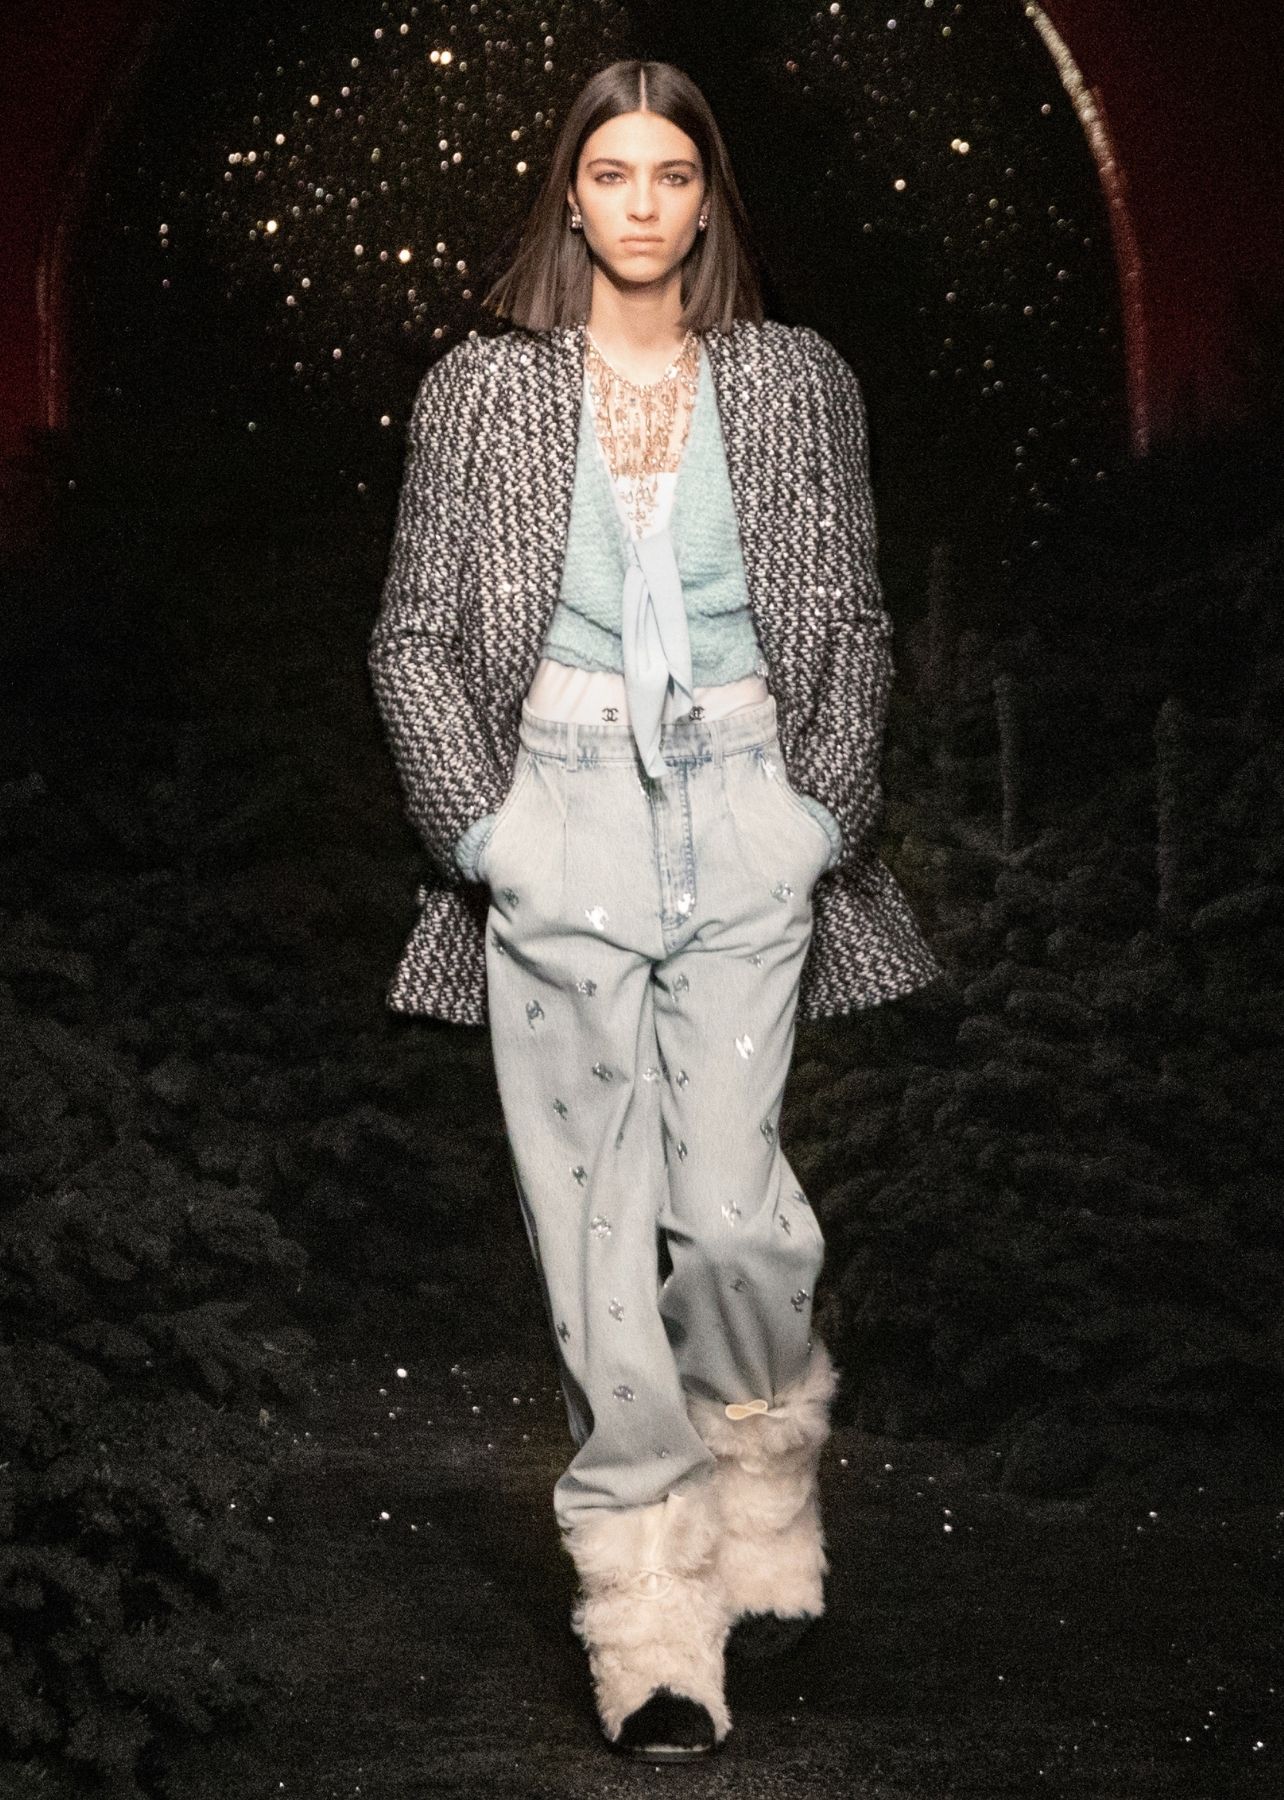 Woman pictured on runway wearing a tweed jacket, light blue blouse, light blue trousers and white fur ankle boots